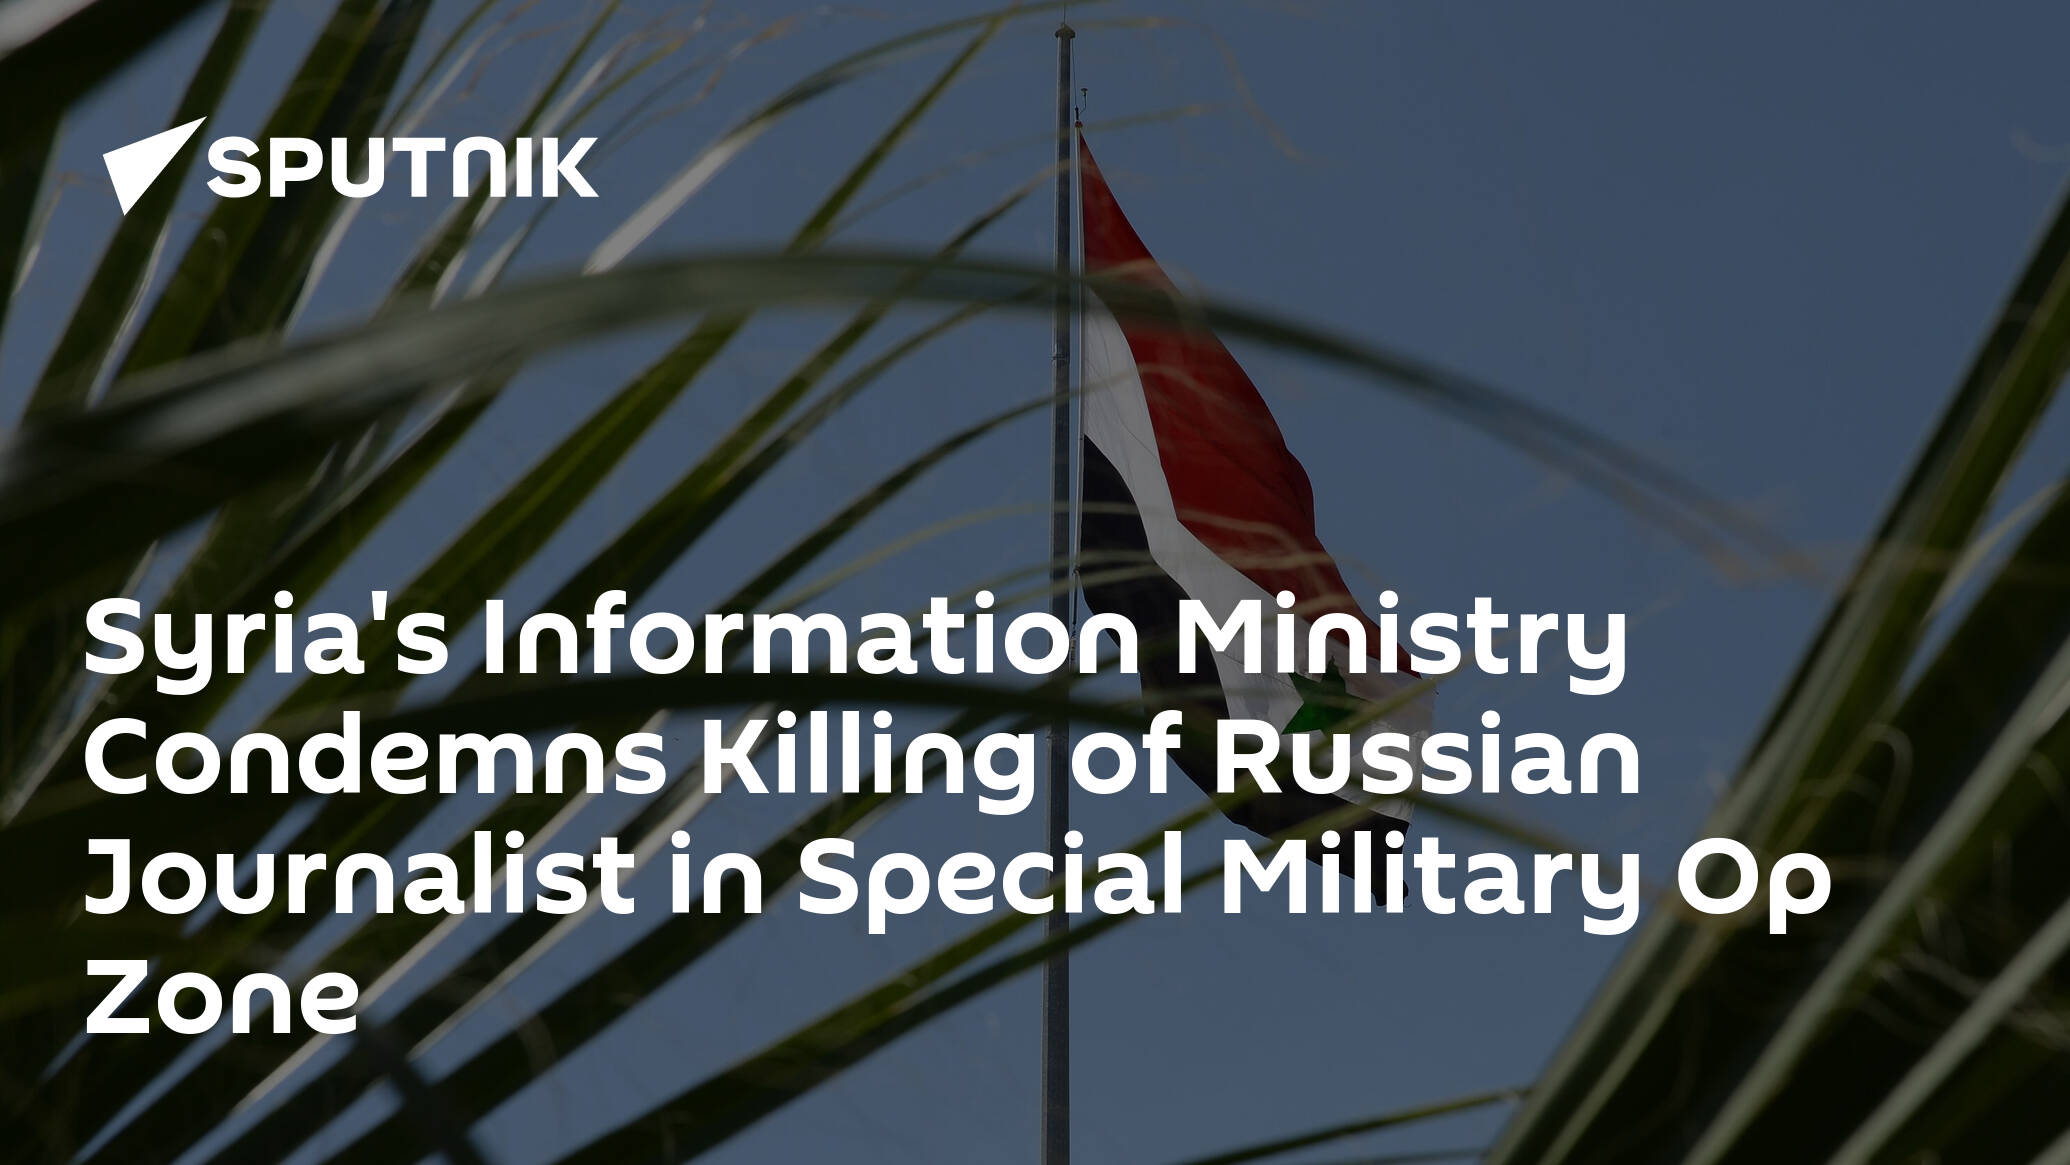 Syria's Information Ministry Condemns Killing of Russian Journalist in Ukraine